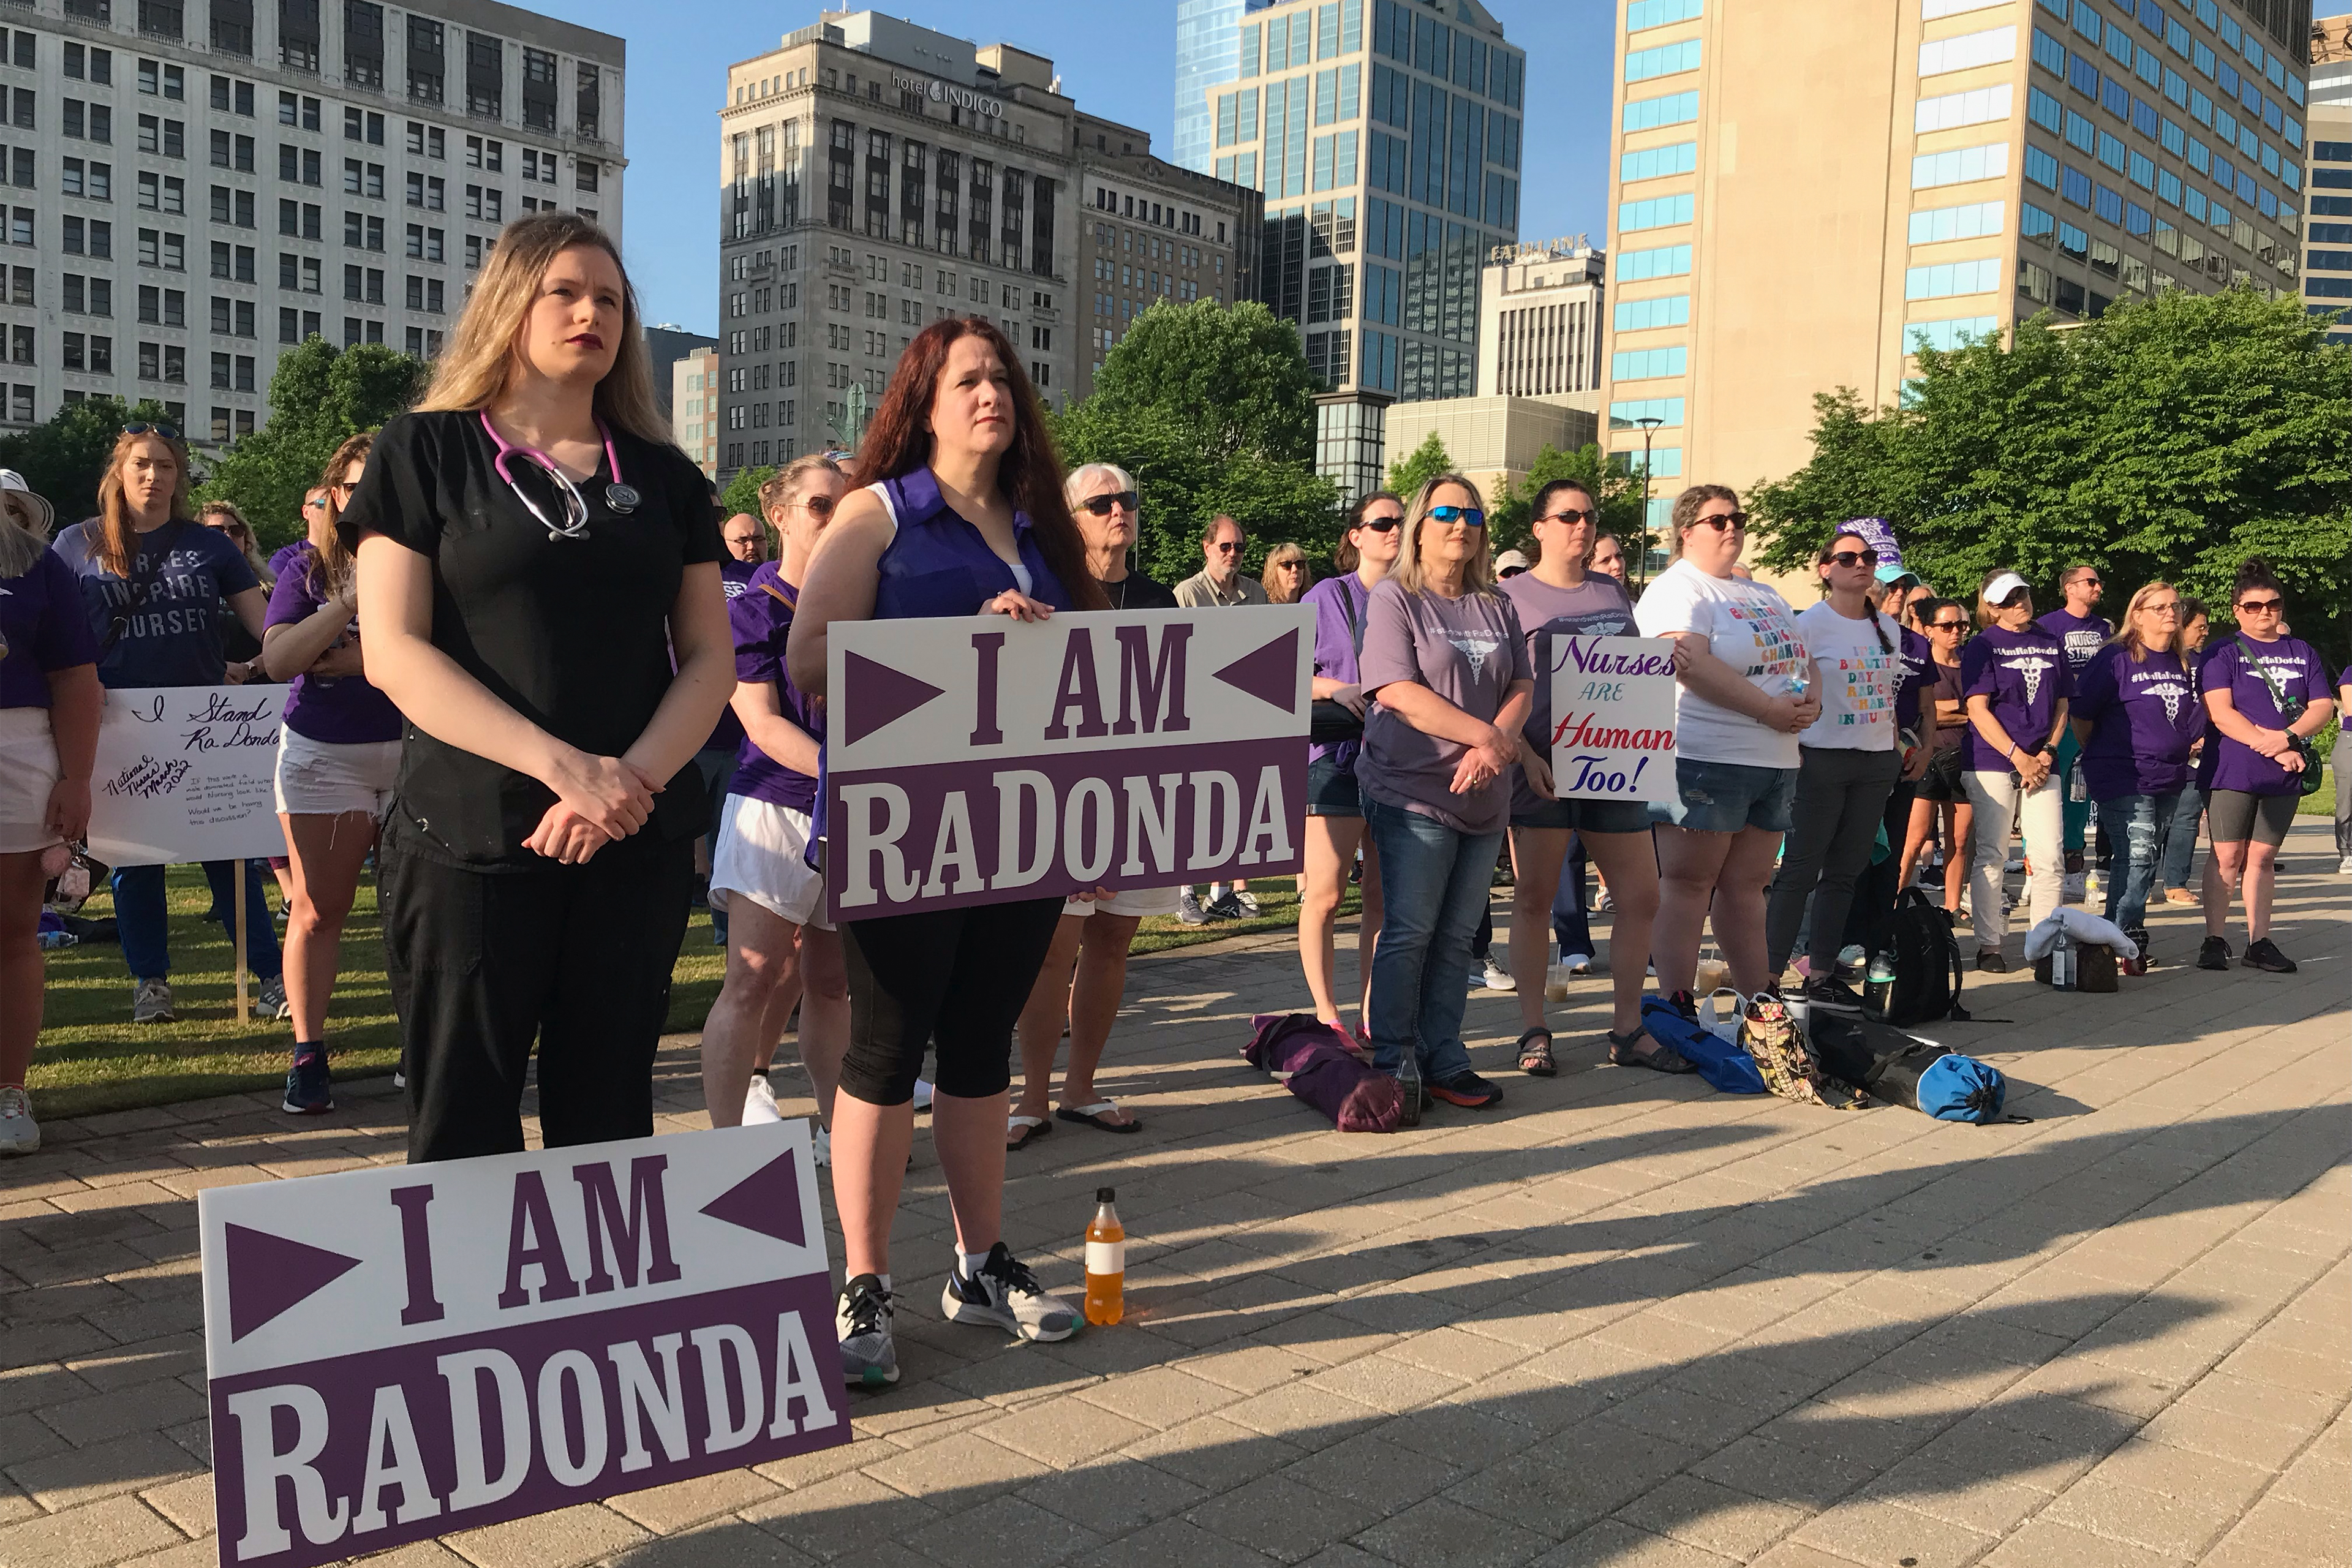 A crowd of demonstrators is seen holding signs that read, "I am RaDonda." Most of the crowd is wearing purple.